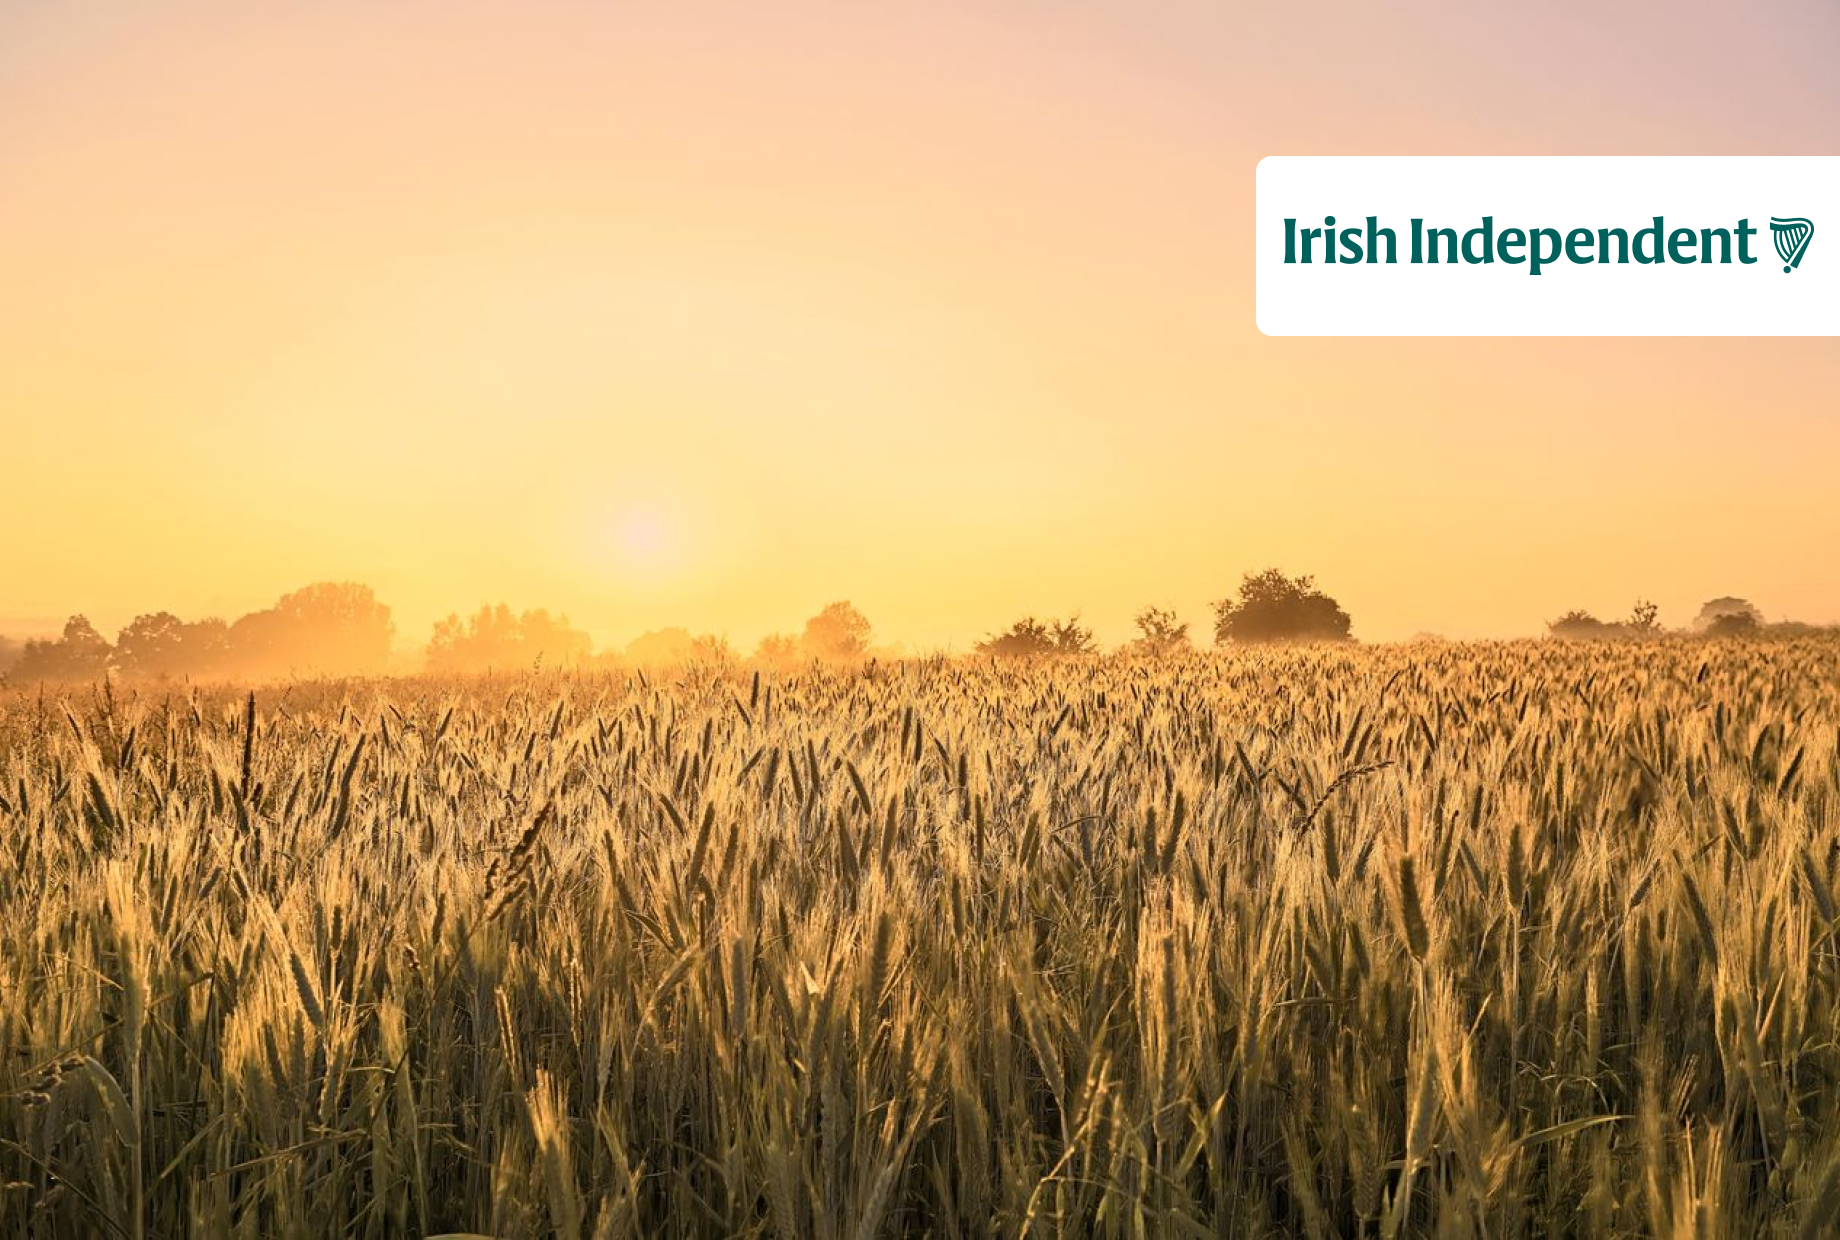 Irish agritech firms are innovators addressing some of the toughest global challenges in agriculture